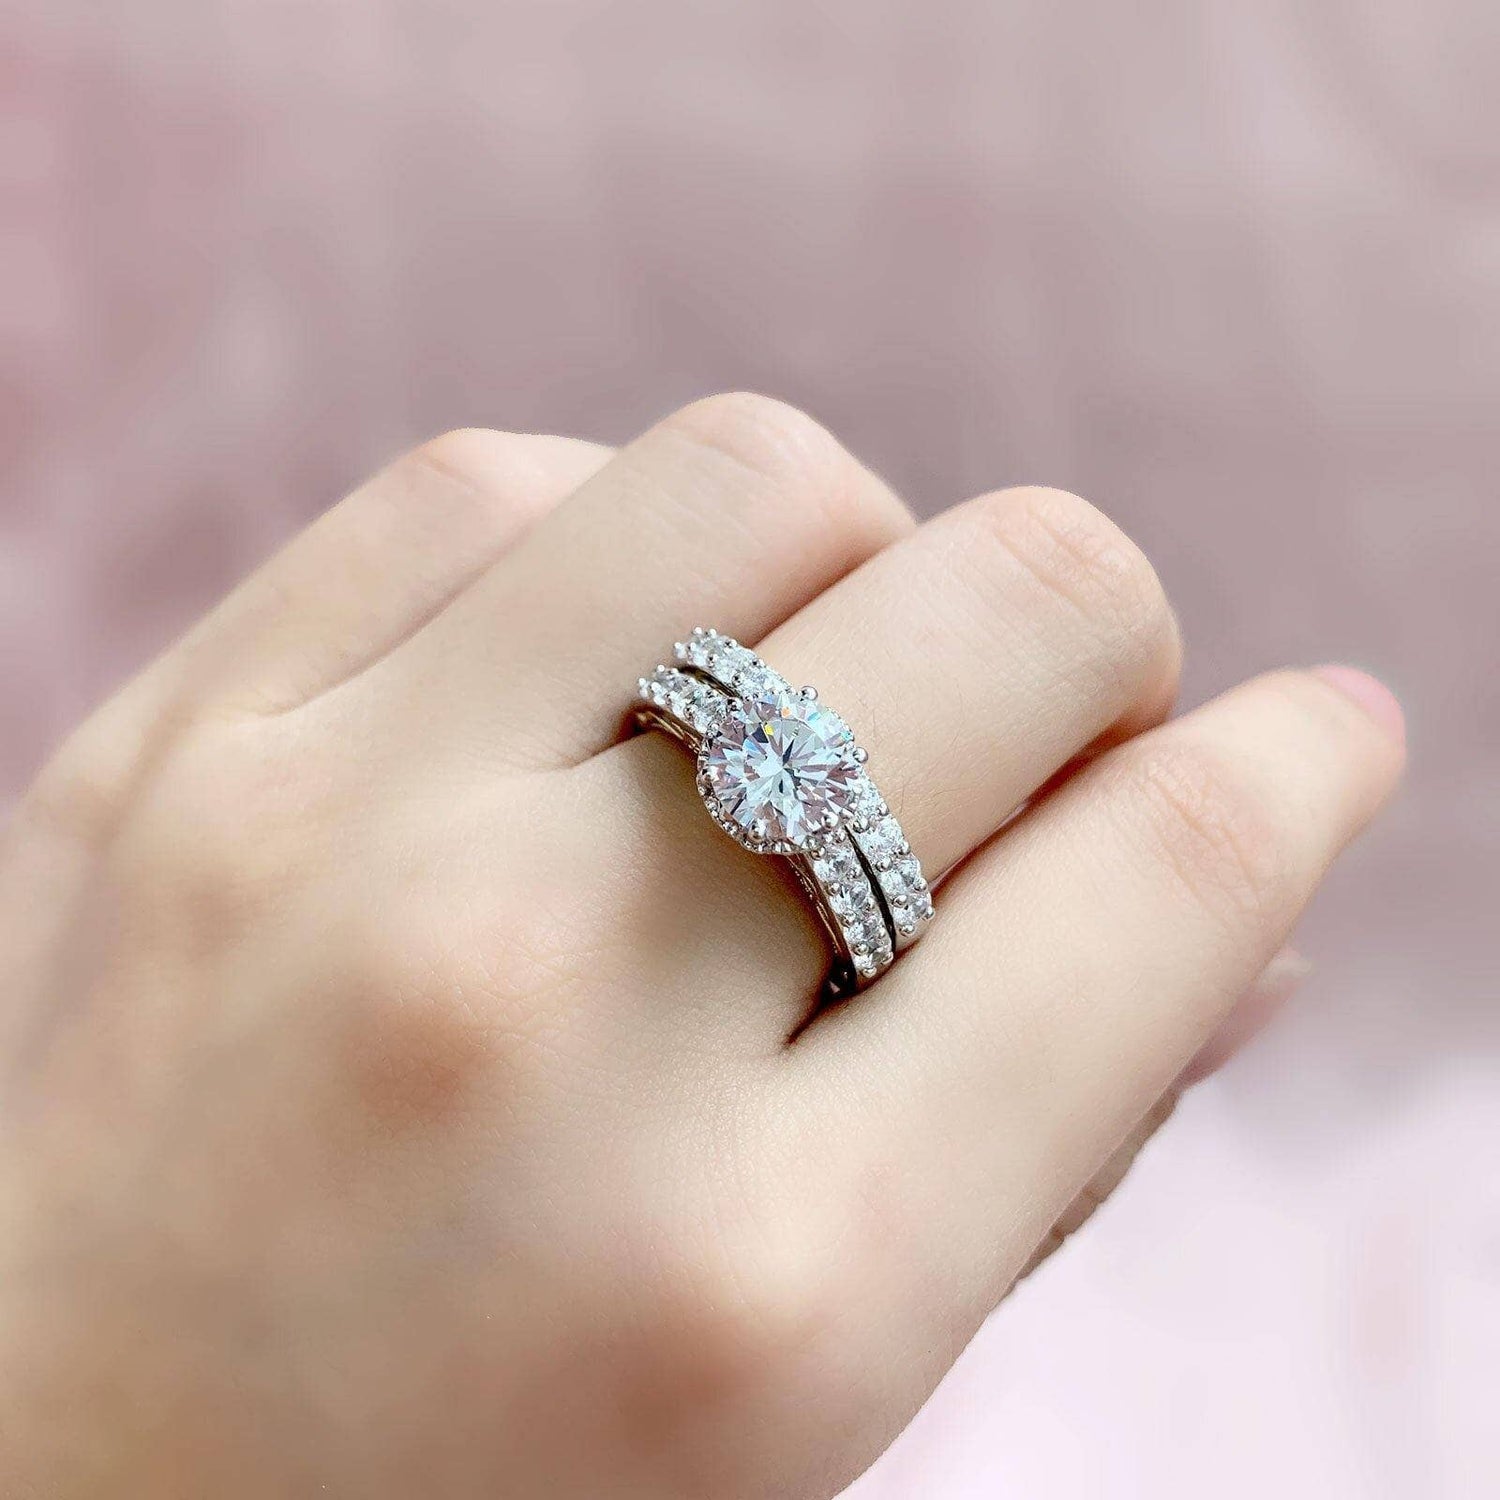 19 colourful engagement rings that are better than diamonds